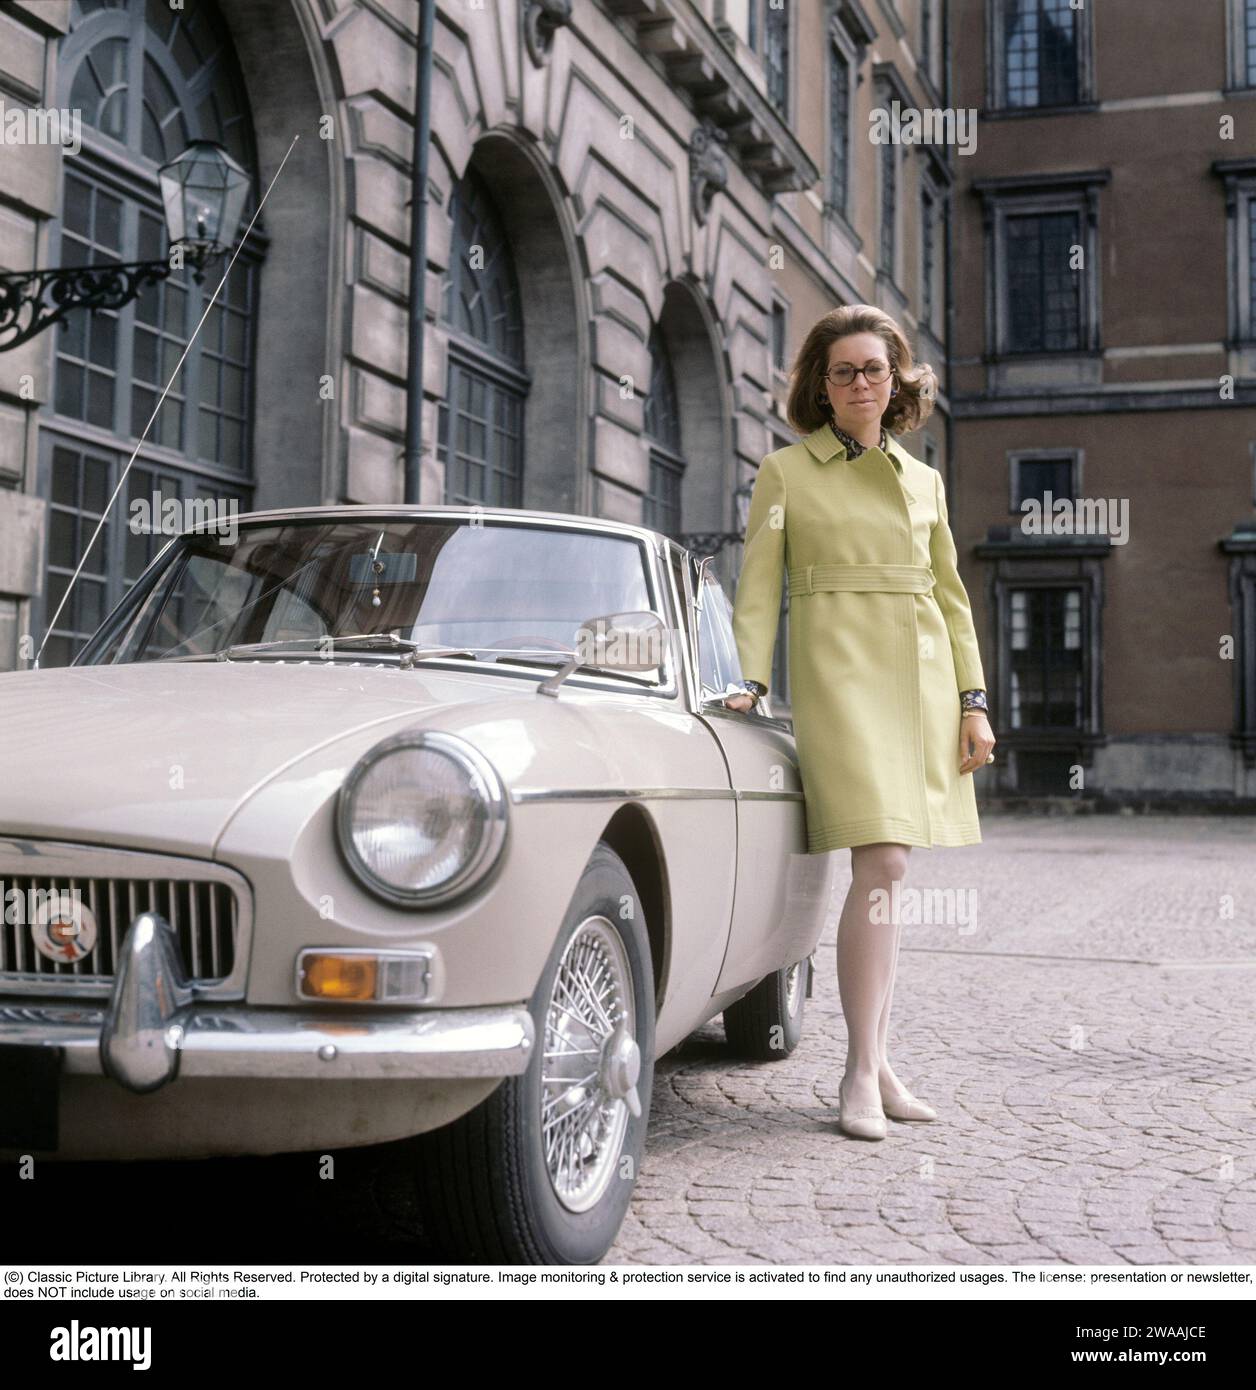 Princess Christina, Mrs. Magnuson. Sister of Sweden's King Carl XVI Gustaf. Born on 3 August 1943.   The car that is two years old here is an MG MGB, a sports car in the color Sany Beige, produced by the British car manufacturer MG between 1962 and 1980. It was available as a convertible and with a 2+2-seater covered body (GT). The six-cylinder versions produced from 1967-69 were called MGC. Photographed outside the Royal Palace in Stockholm on June 2, 1969 in a period outfit. Stock Photo